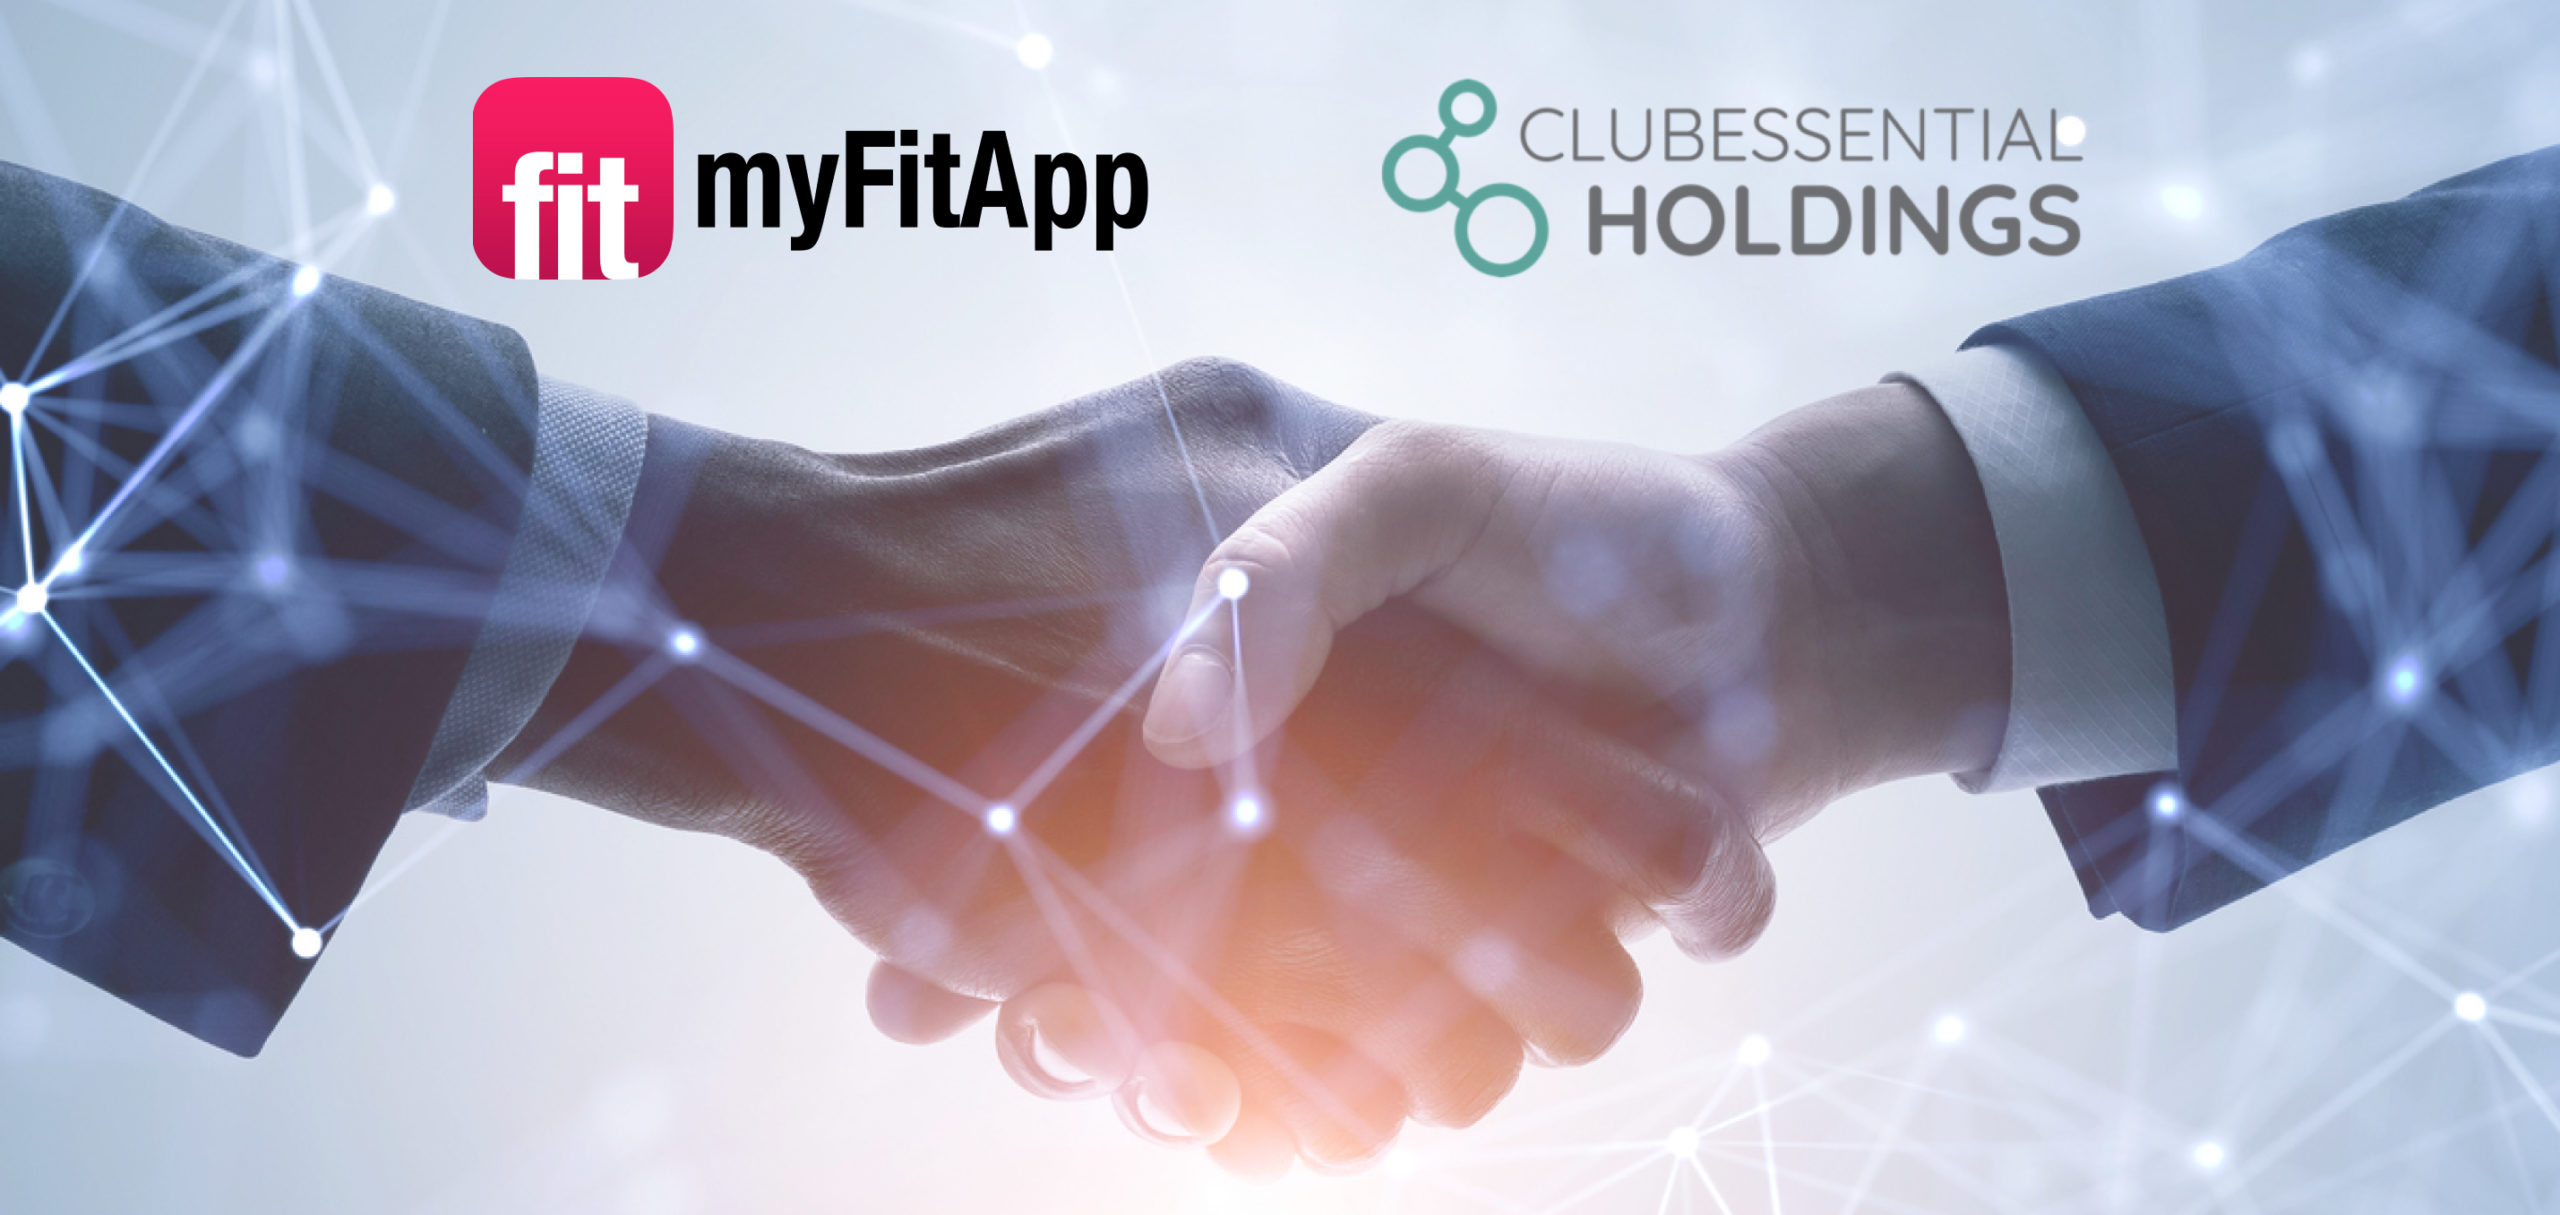 clubessential holdings myfitapp